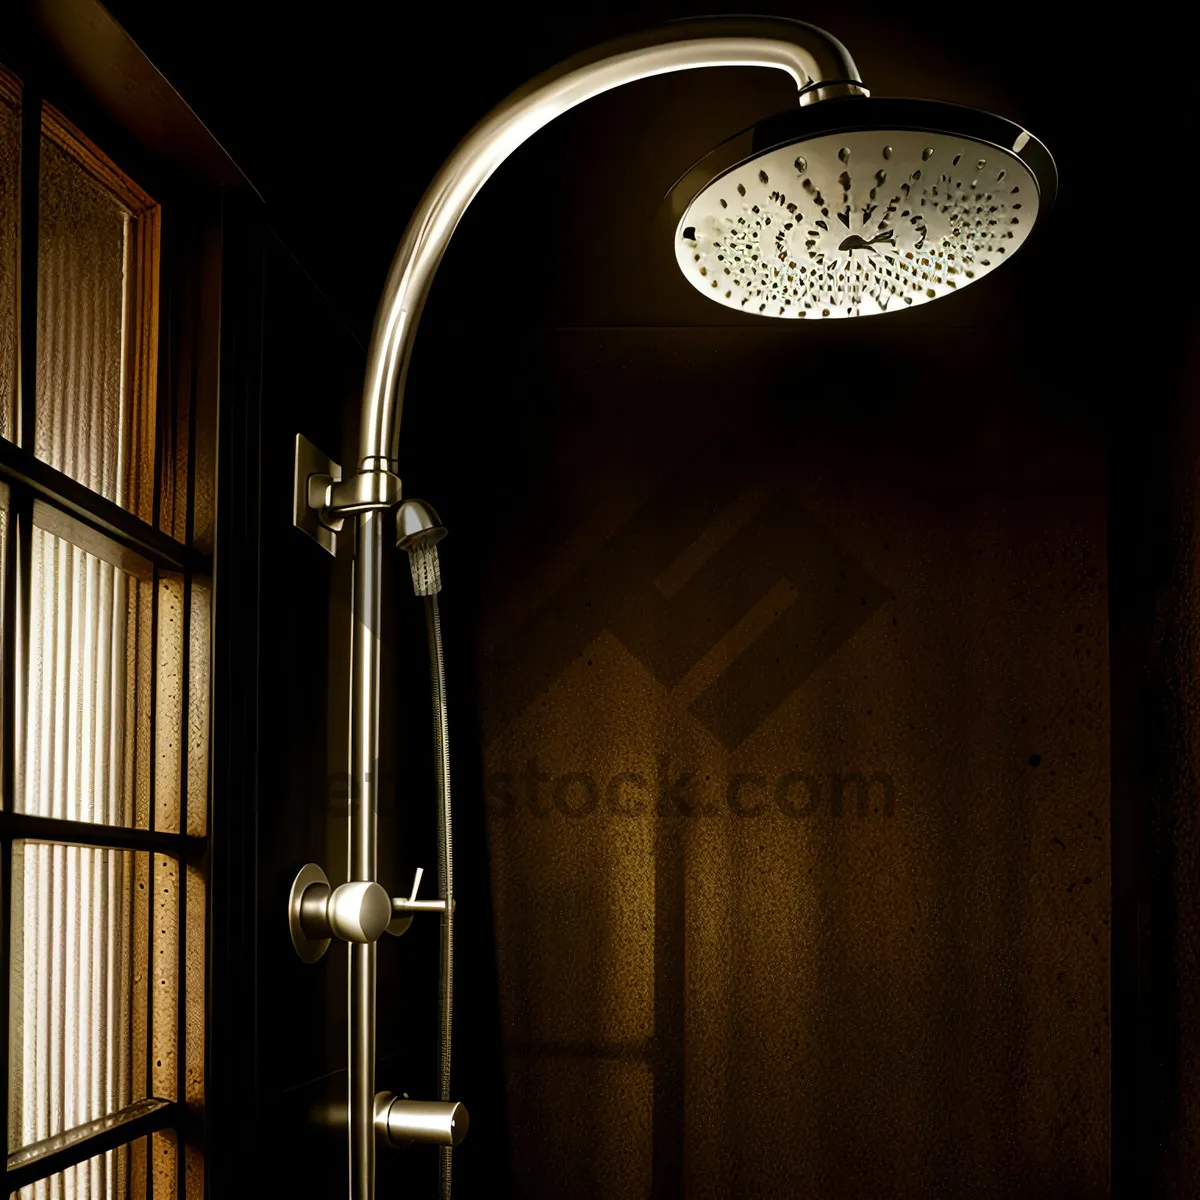 Picture of Stylish Shower Fixture Illuminated by Lamp